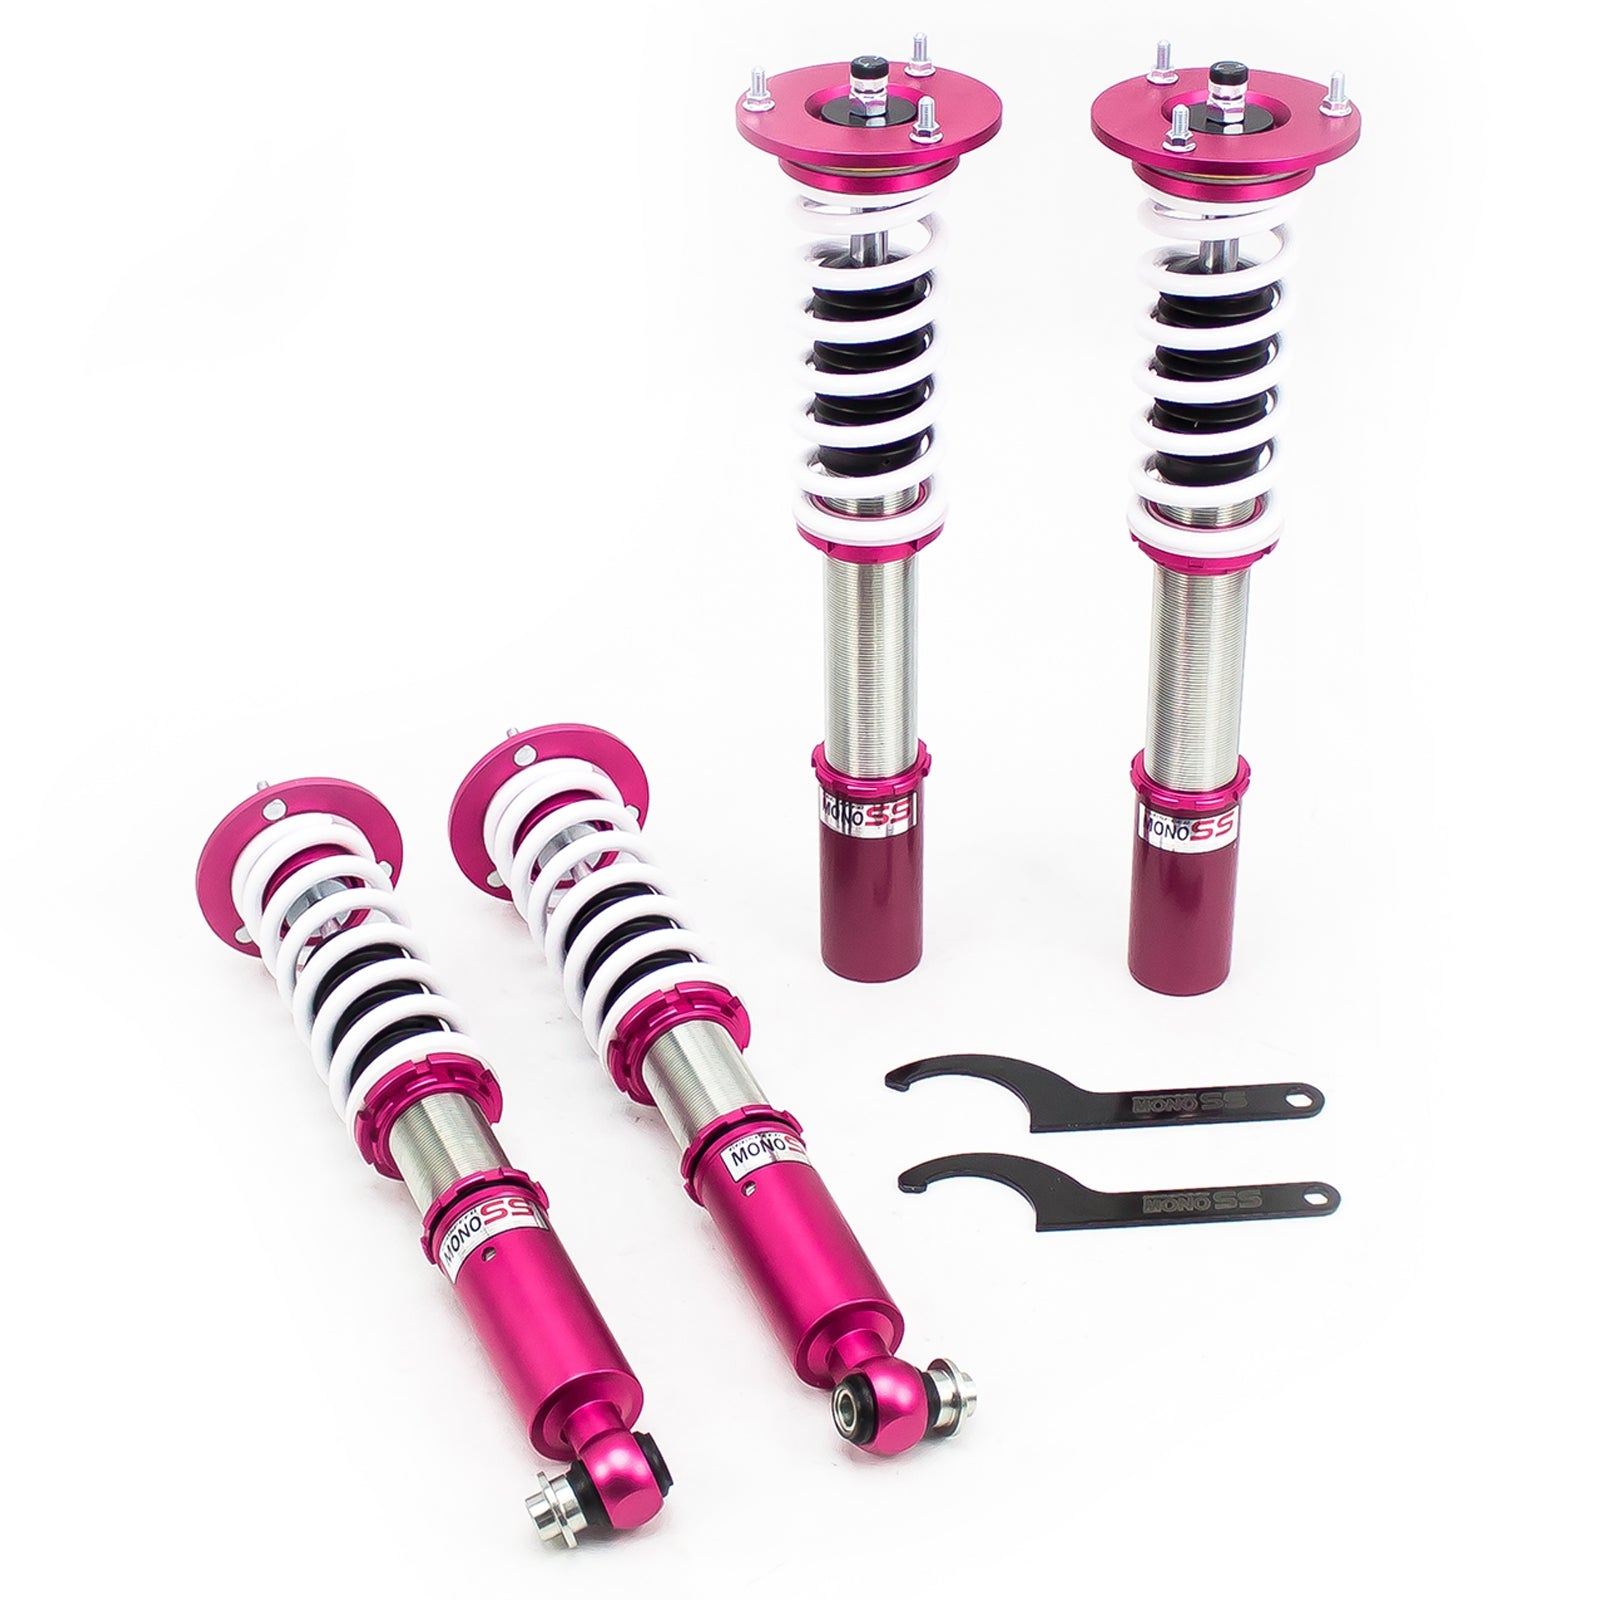 Godspeed MSS0154 MonoSS Coilover Lowering Kit, Fully Adjustable, Ride Height, Spring Tension And 16 Click Damping, BMW 5-Series(E60) 2004-10